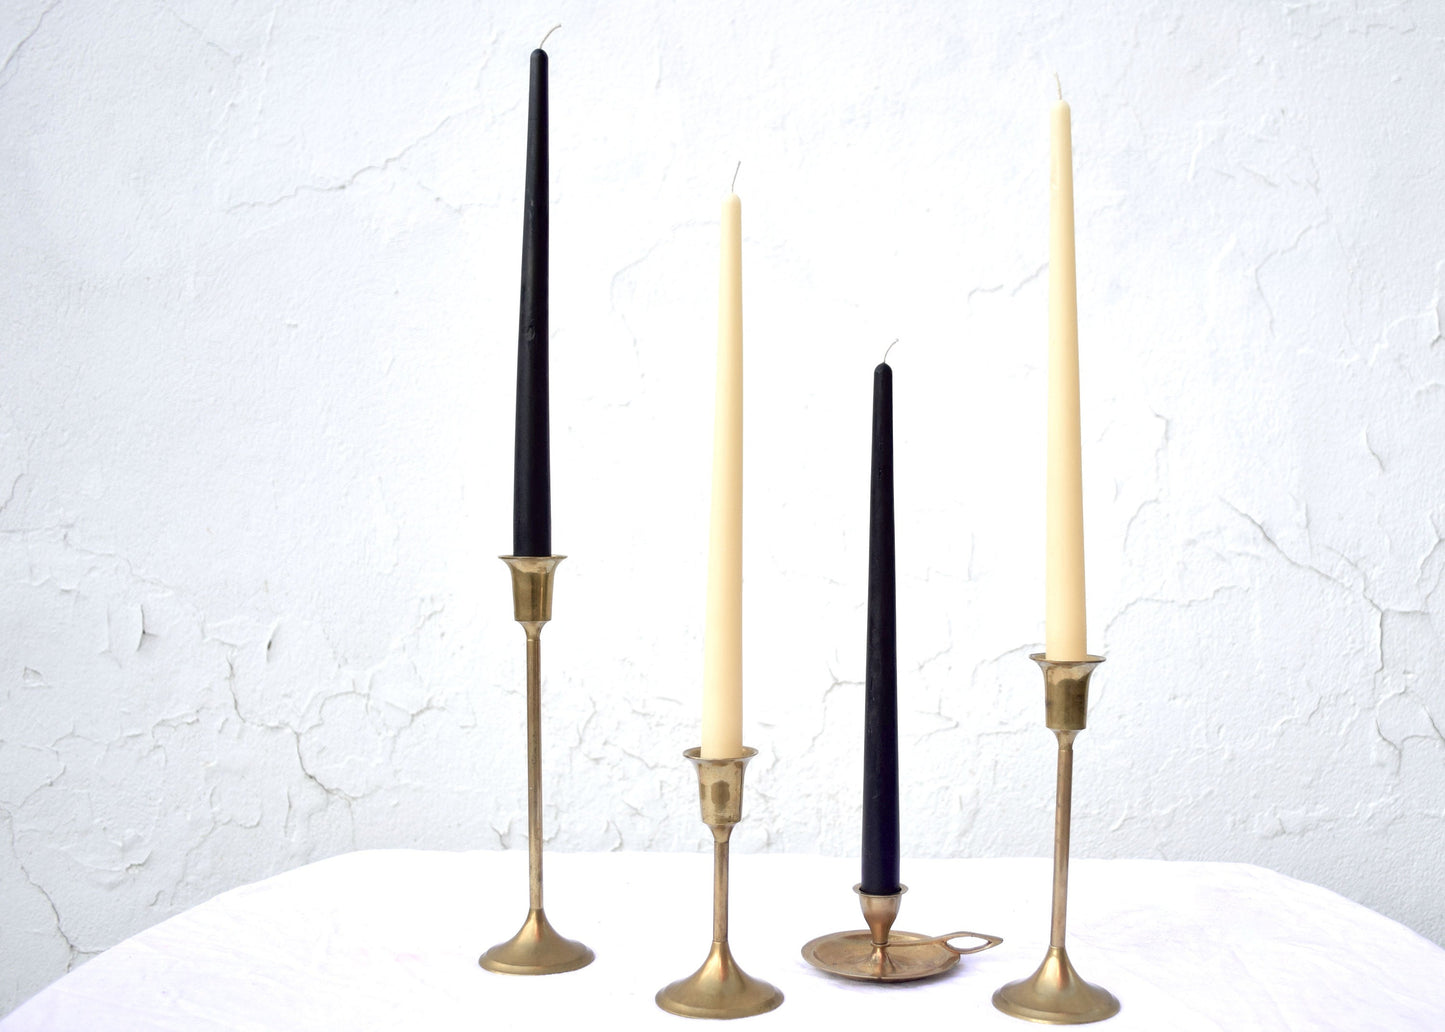 Tall 12" Taper Candles in Pure Beeswax, Pair of 2 - Yellow, Cream or Black - Beeswax Candles, Tapers, Candles